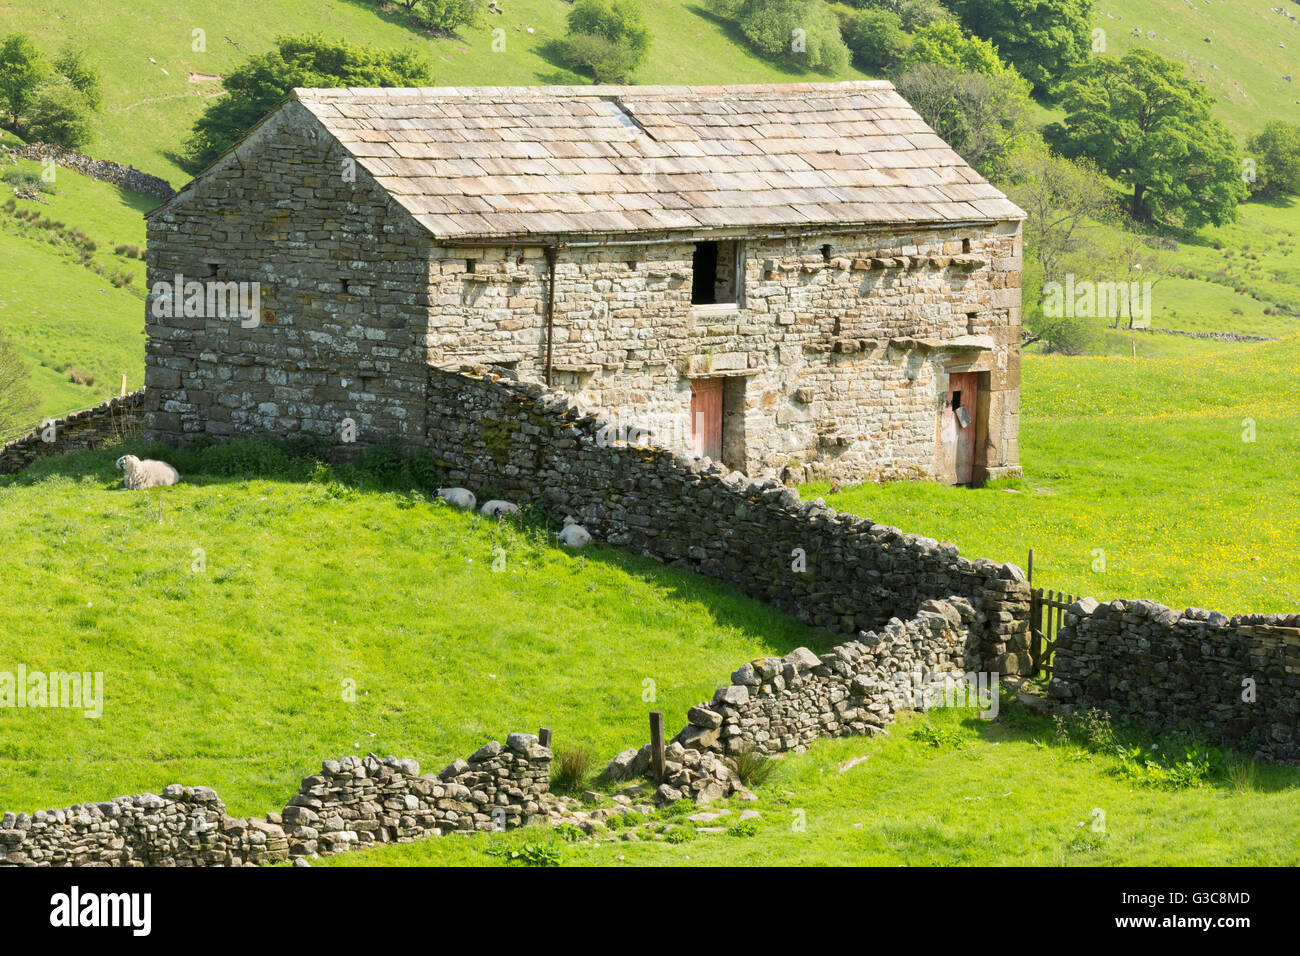 Dales out barn and dry stone walls at Keld in upper Swaledale The Yorkshire Dales, UK, June 2016 Stock Photo